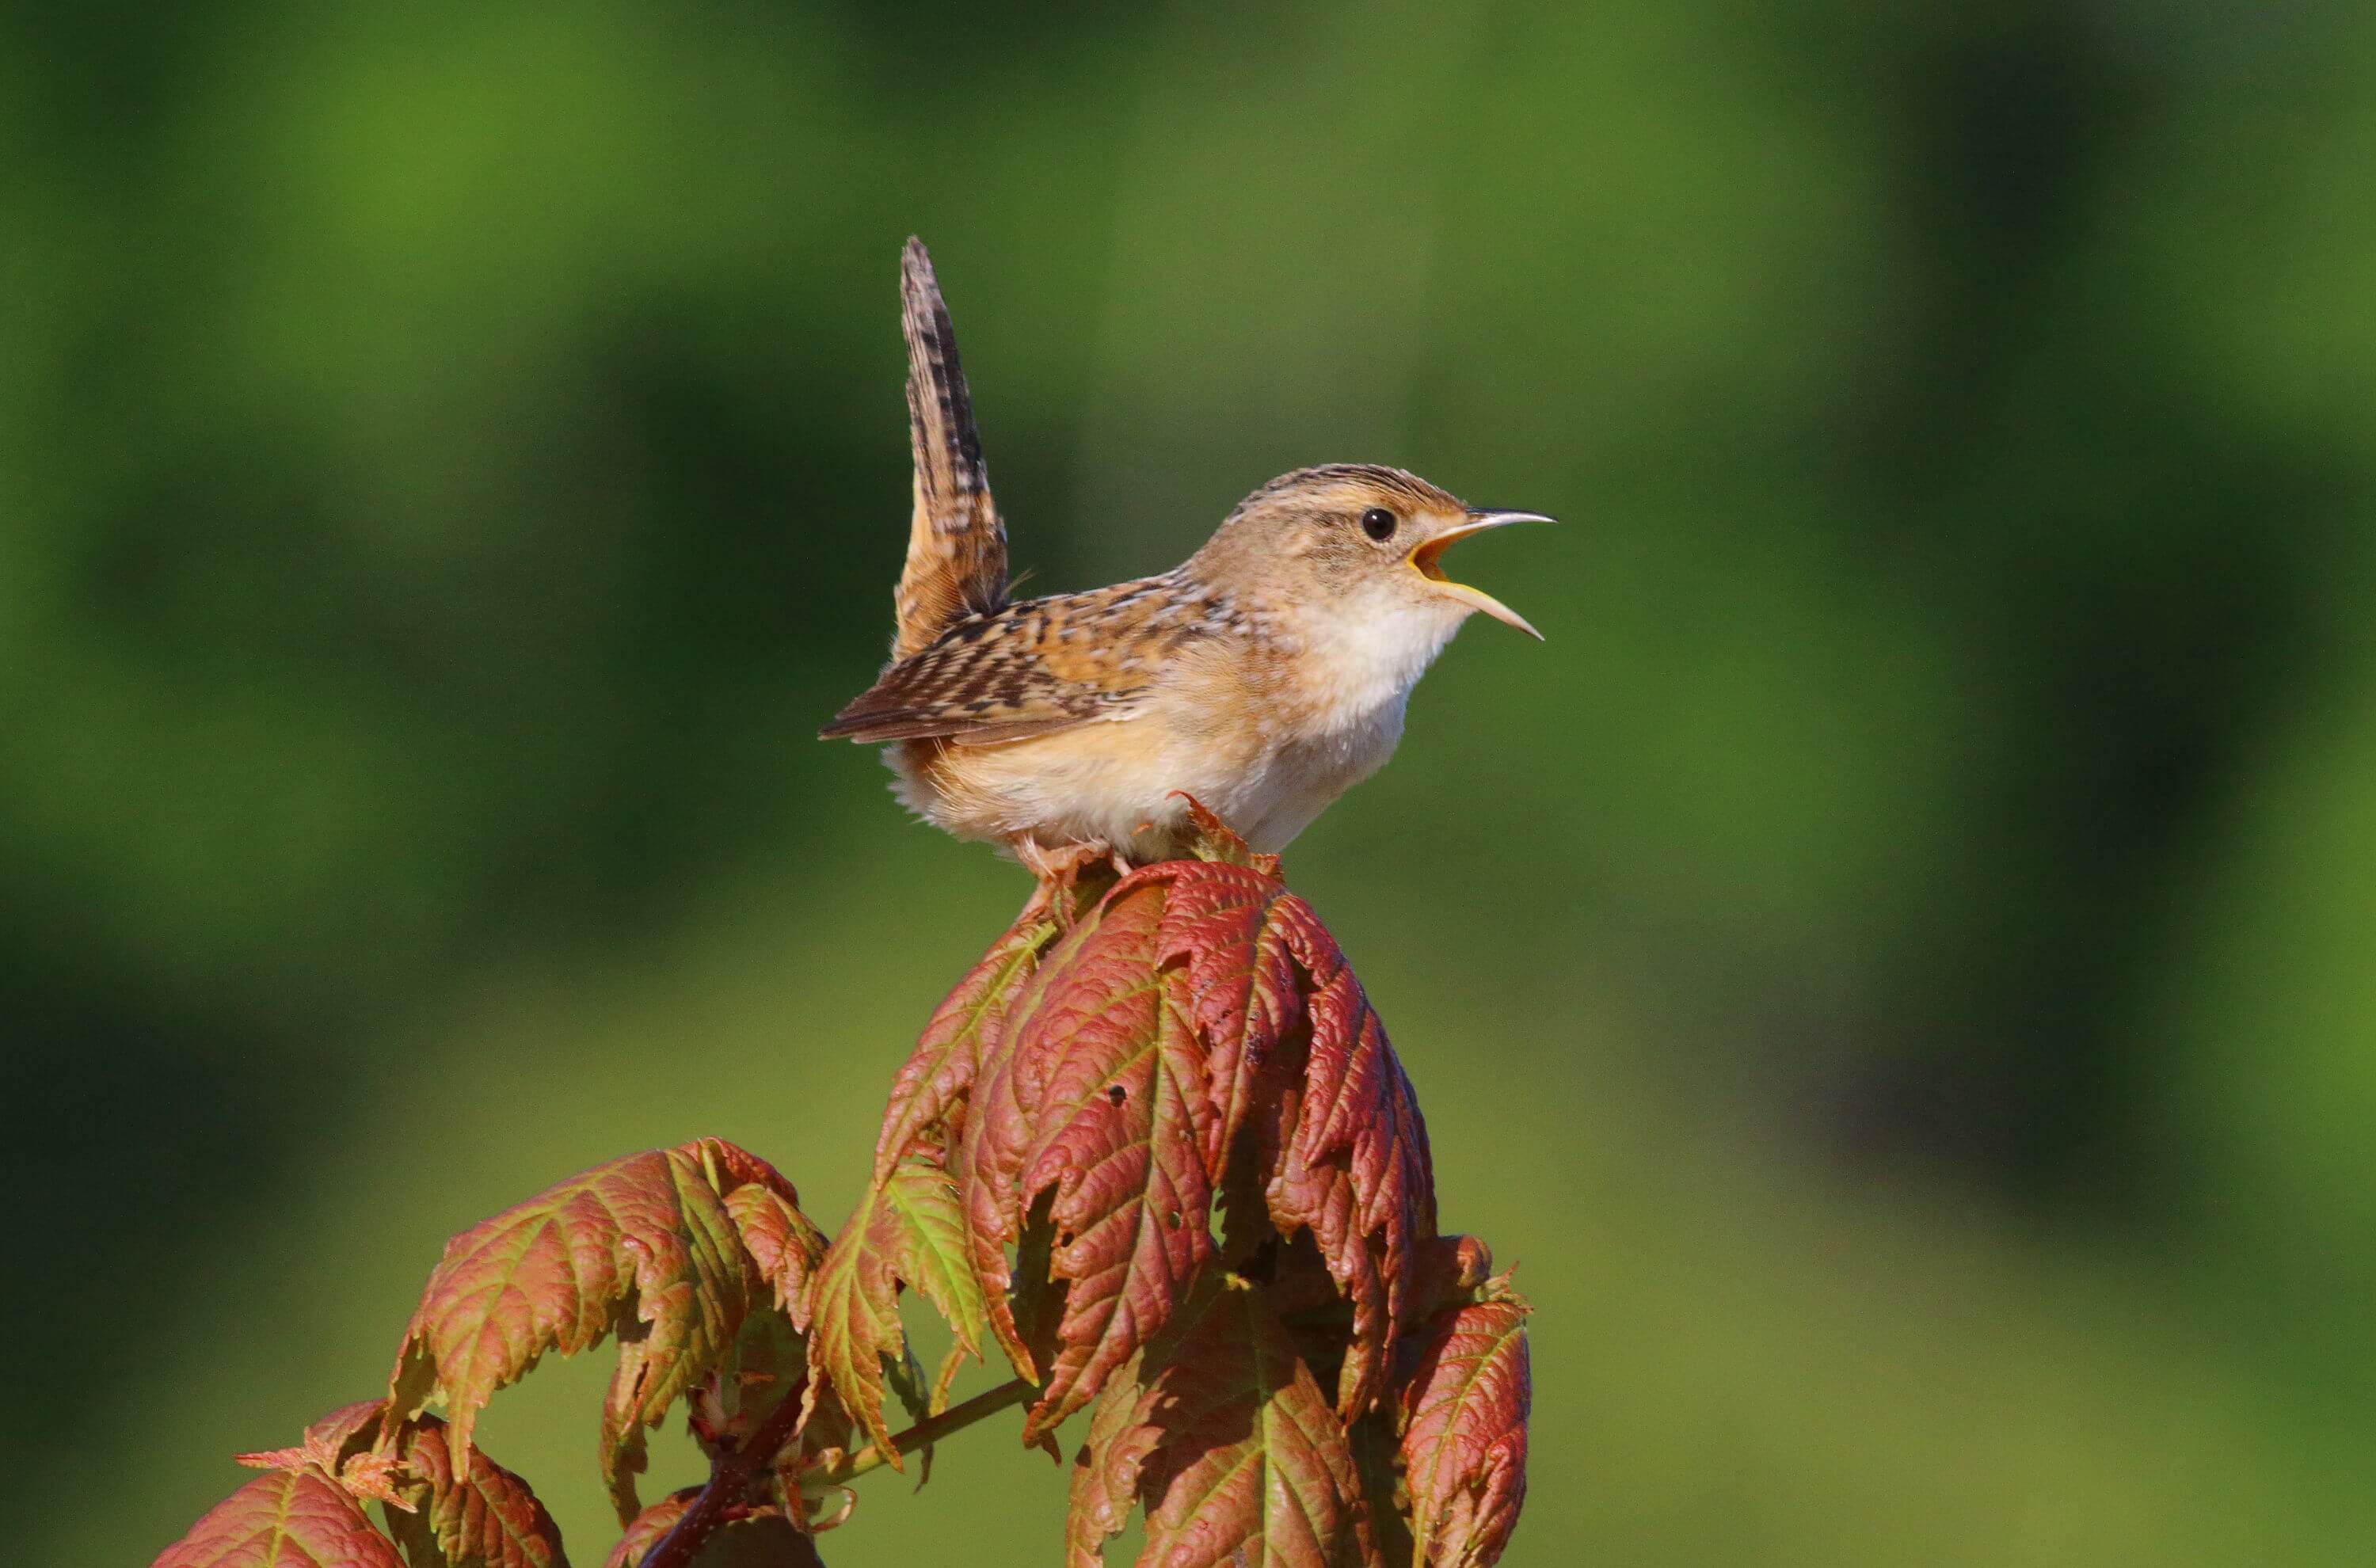 I saw this Sedge Wren at Crex Meadows Wildlife Area, in Wisconsin. Photo by Bruce Beehler